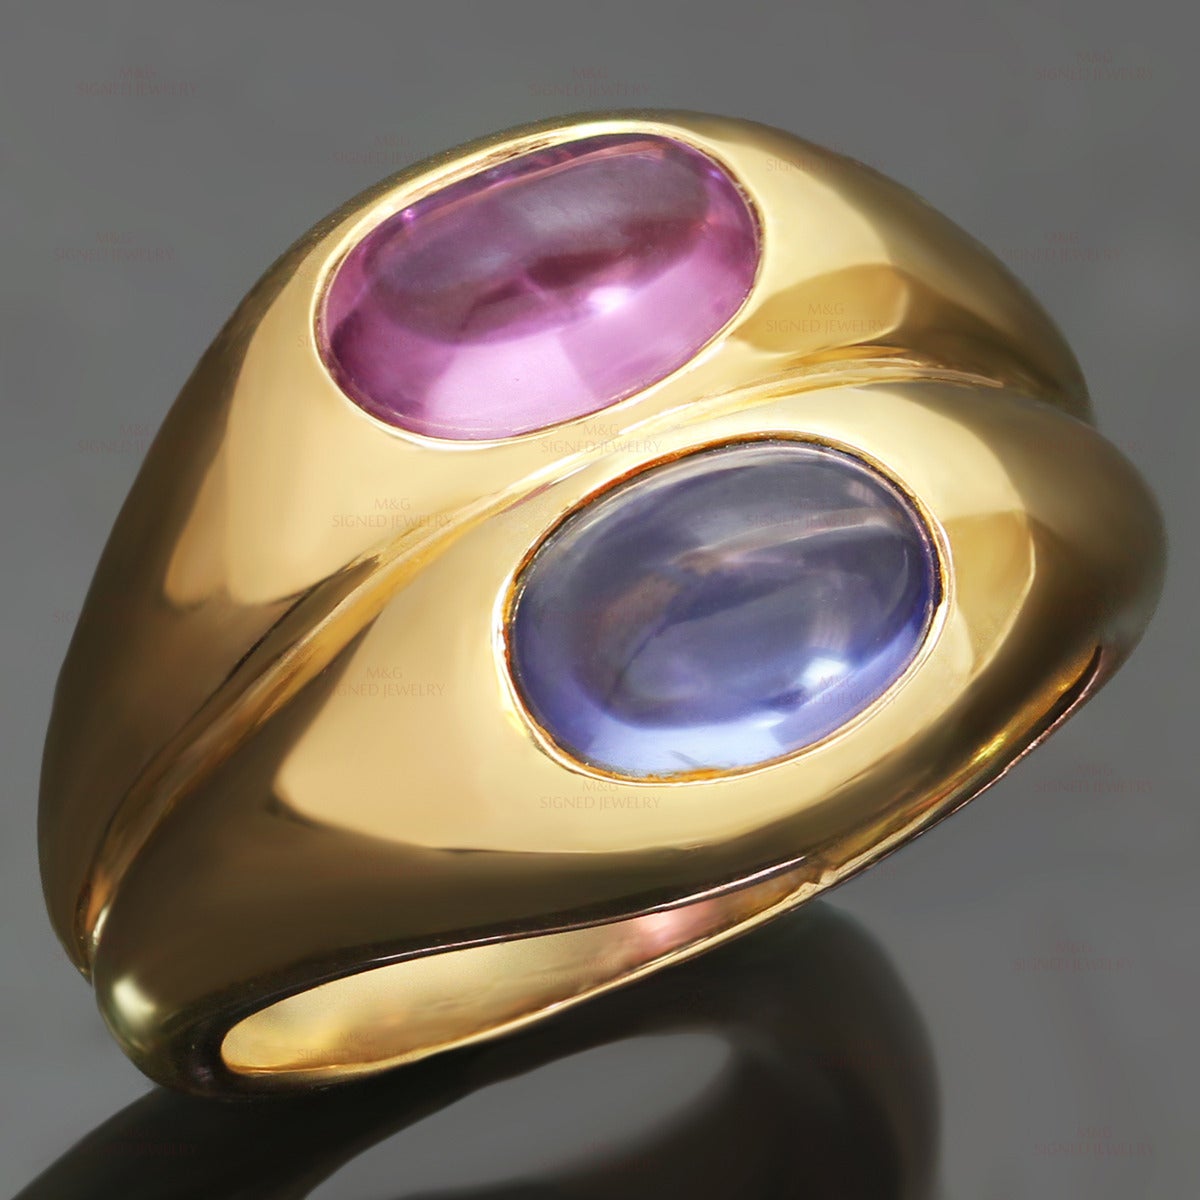 This fabulous Bvlgari Ring is crafted in 18k yellow gold and set with pink and blue cabochon oval sapphires of an estimated 4.0 carats. Made in Italy circa 1980s. Measurements: 0.59" (15mm) width. The ring size is 6.5 - EU 53. Resizable. Sizing